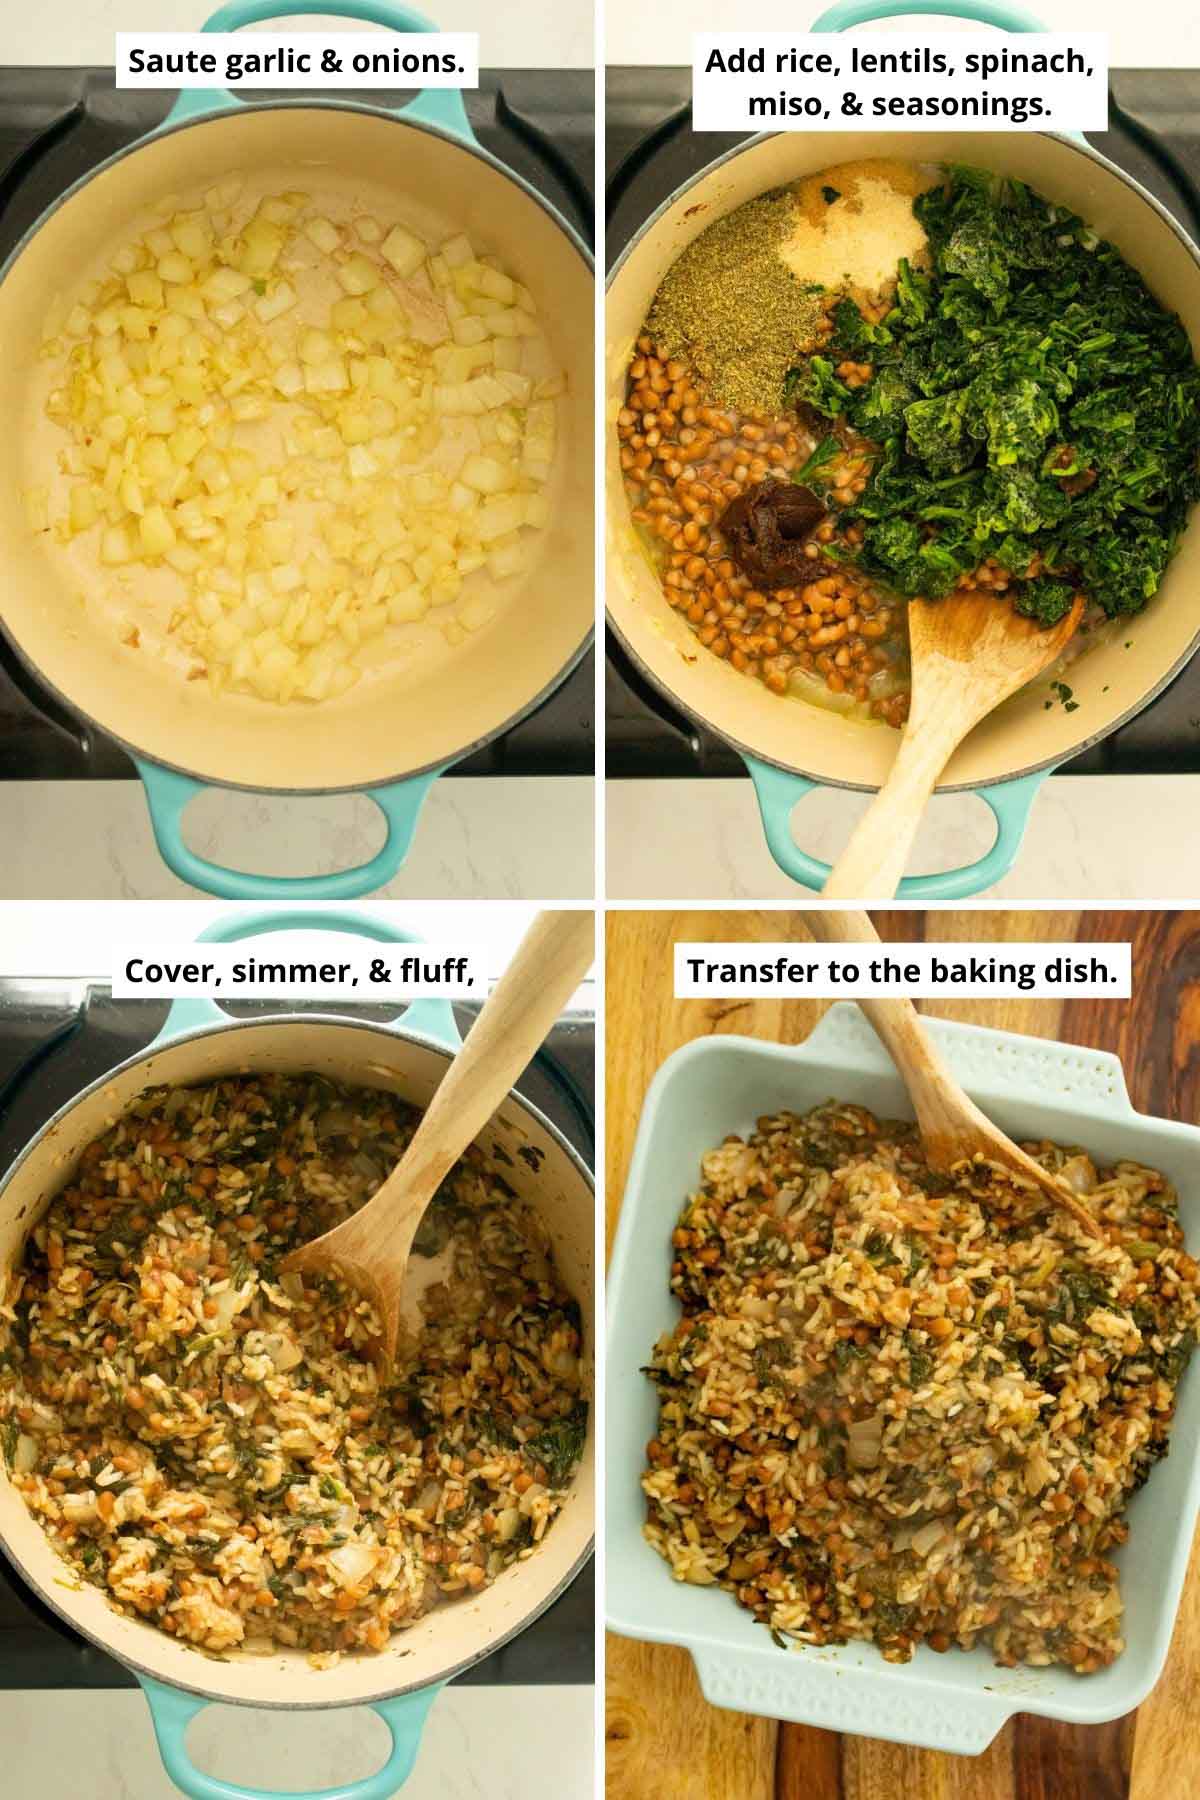 image collage showing the sautéed onion and garlic; the pan with the rice, lentils, veggies, and seasonings mixed in; the rice mixture after cooking; and the rice mixture transferred to the baking pan